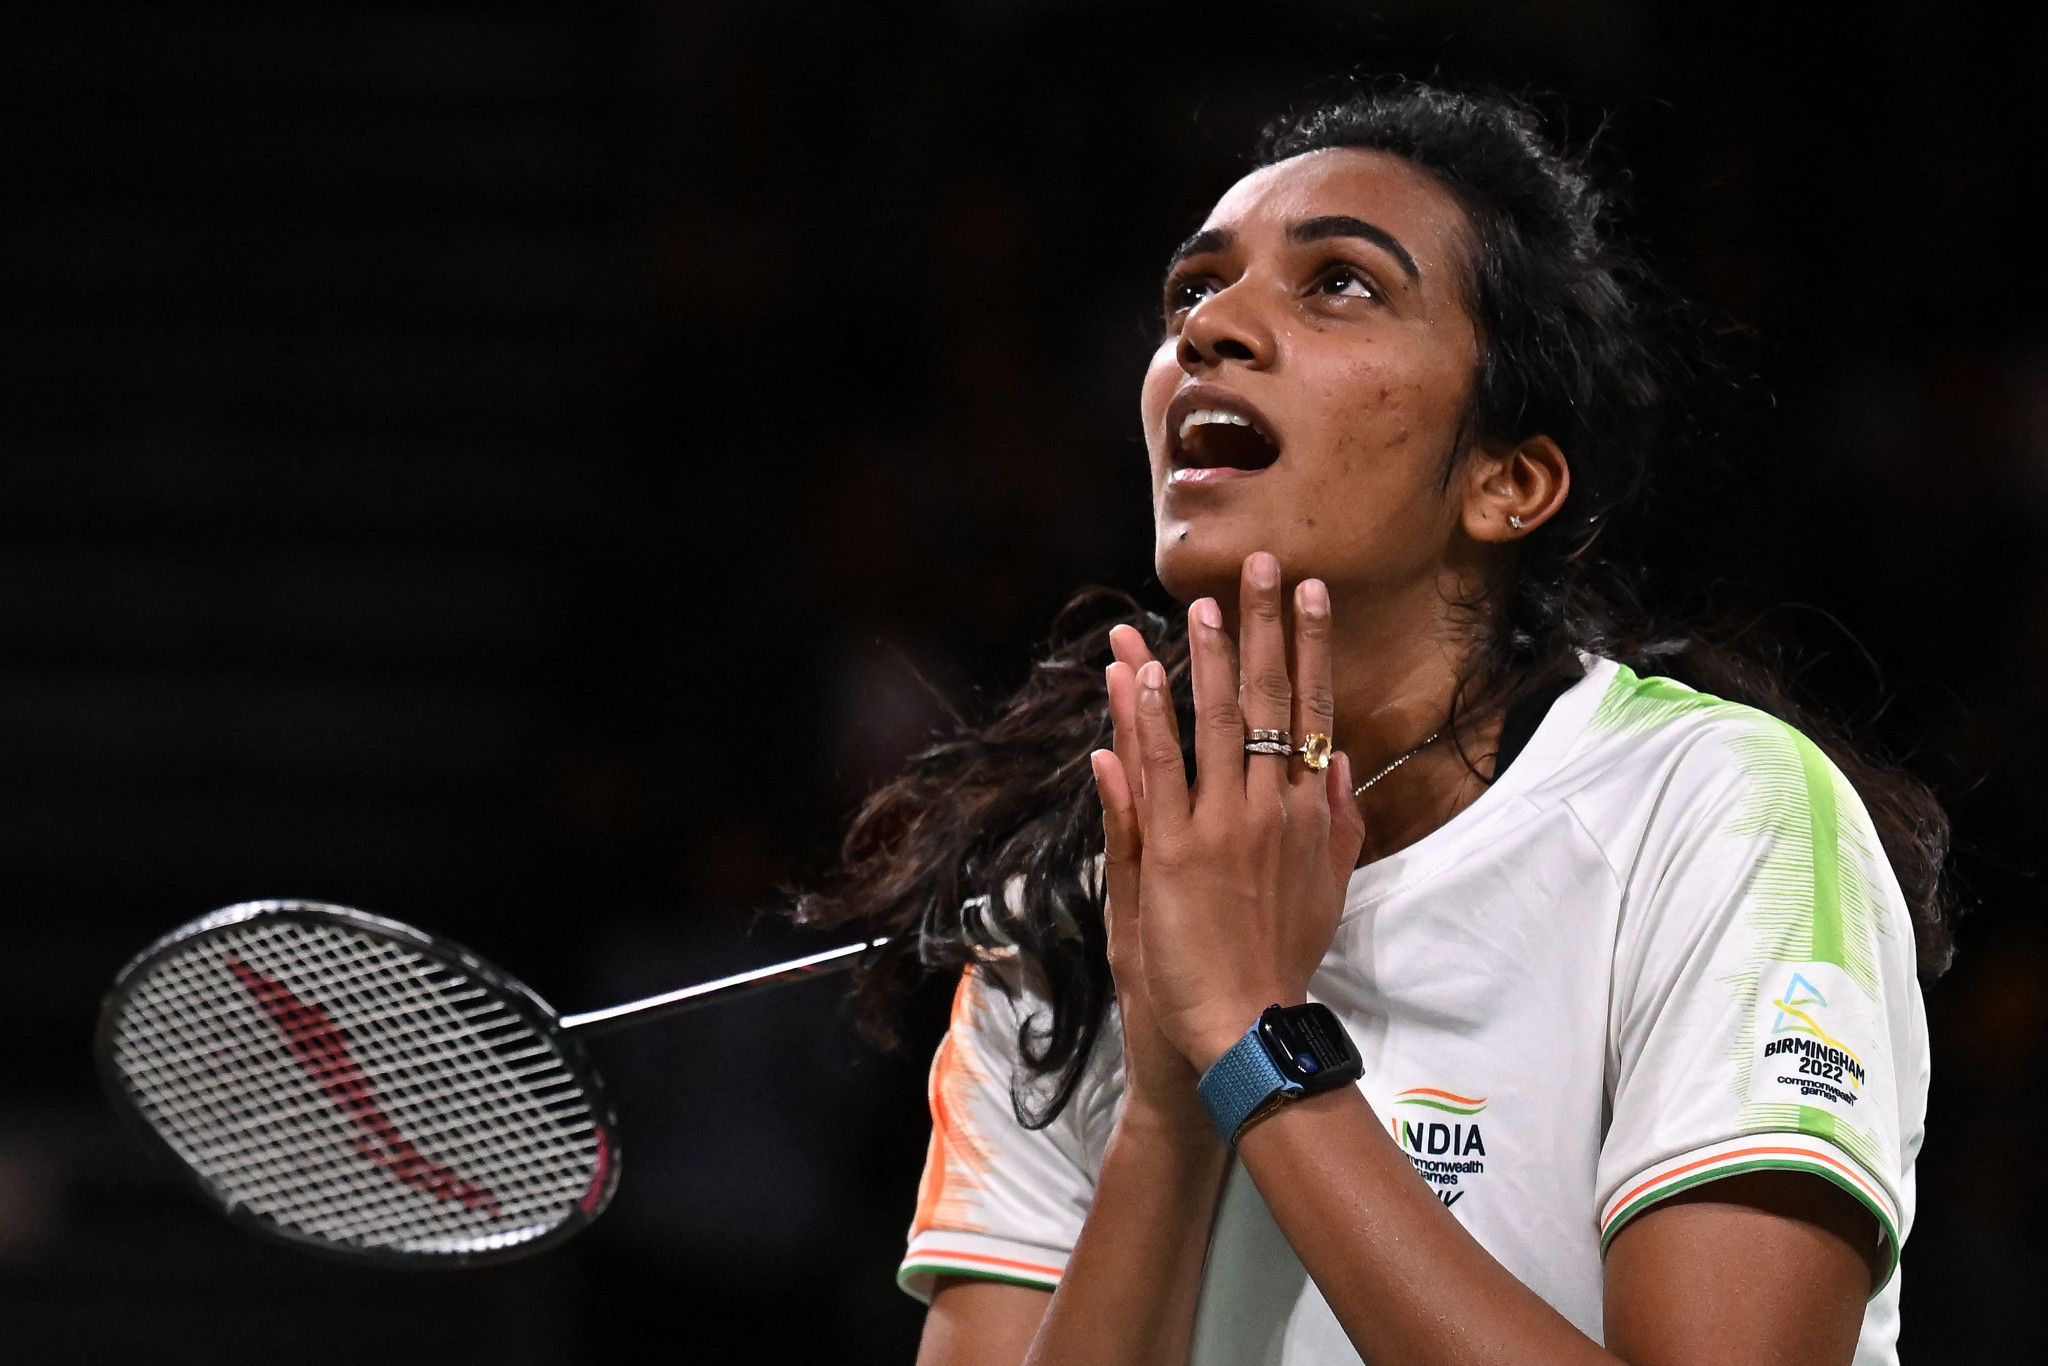 PV Sindhu finally took gold in the women's singles at the Commonwealth Games ©Getty Images